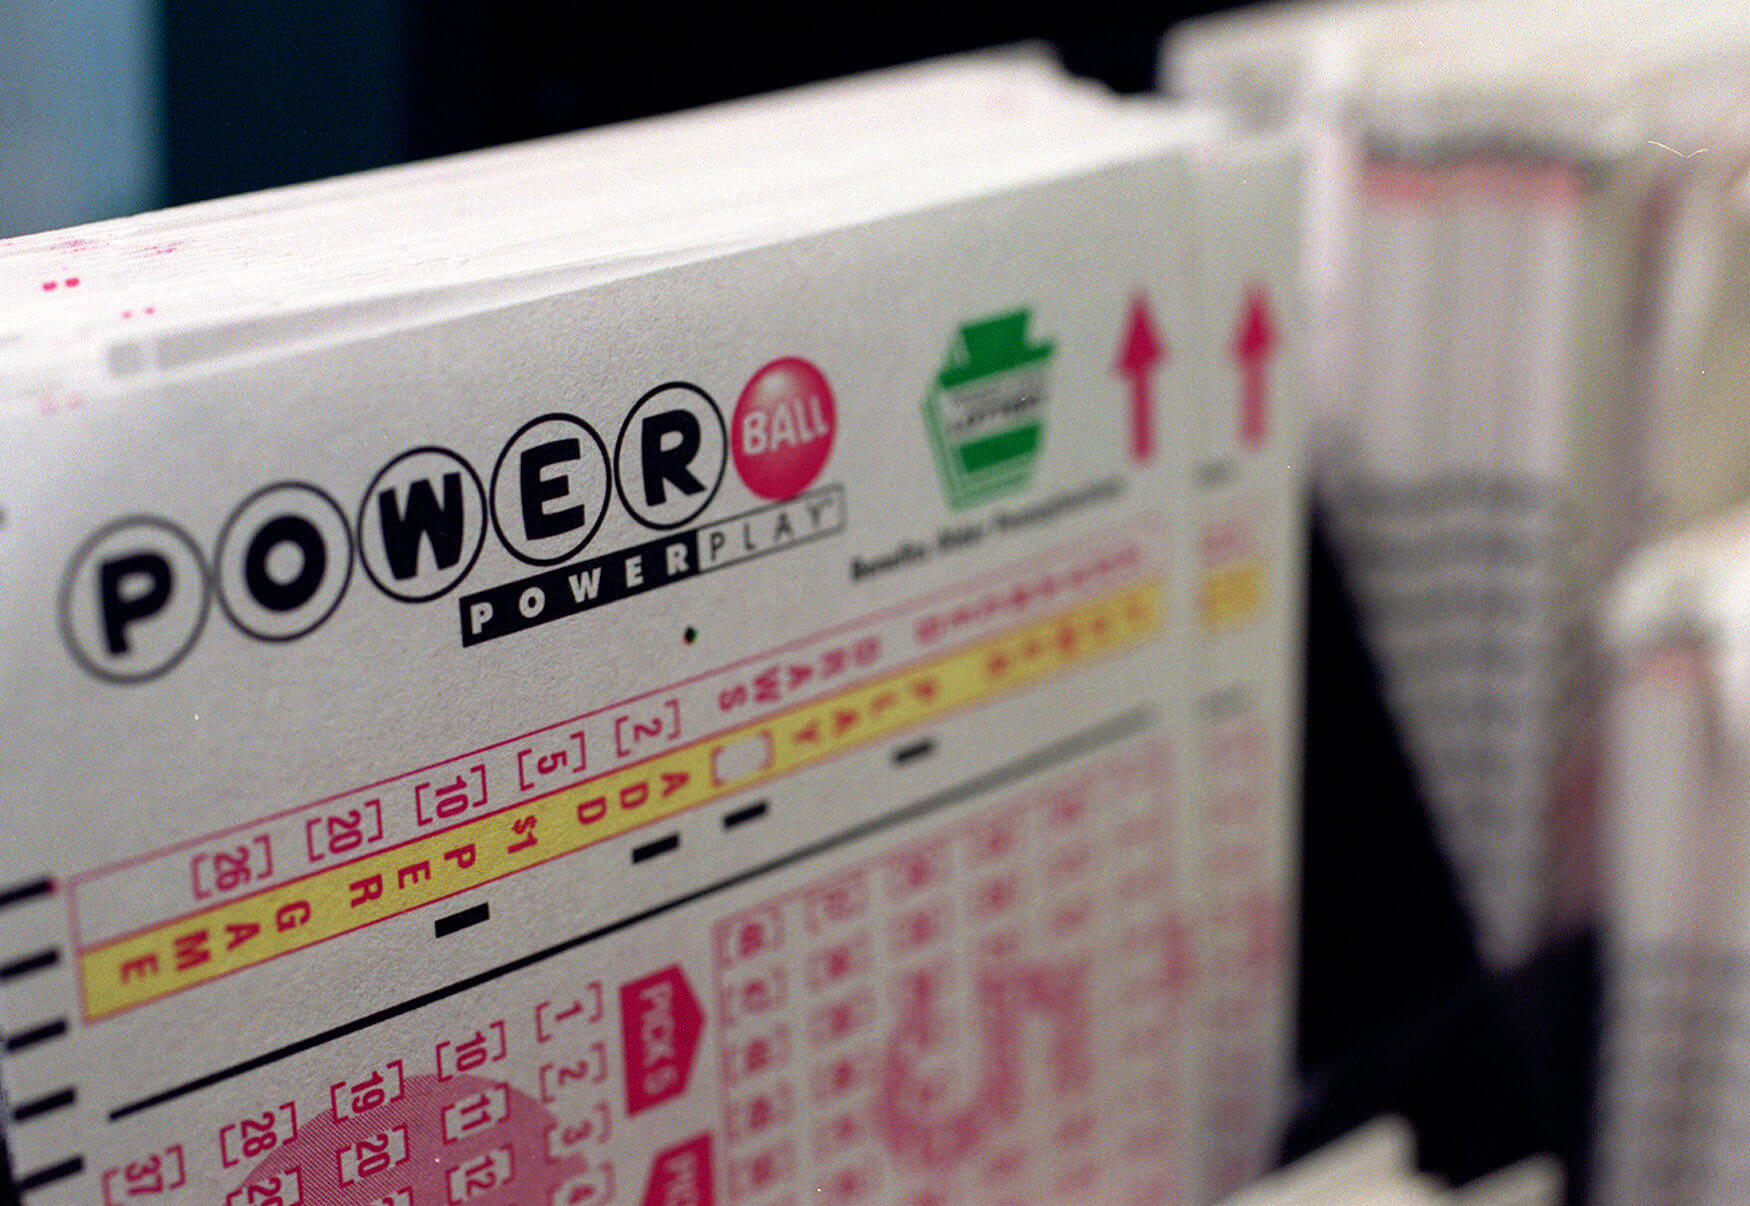 The Powerball Lottery